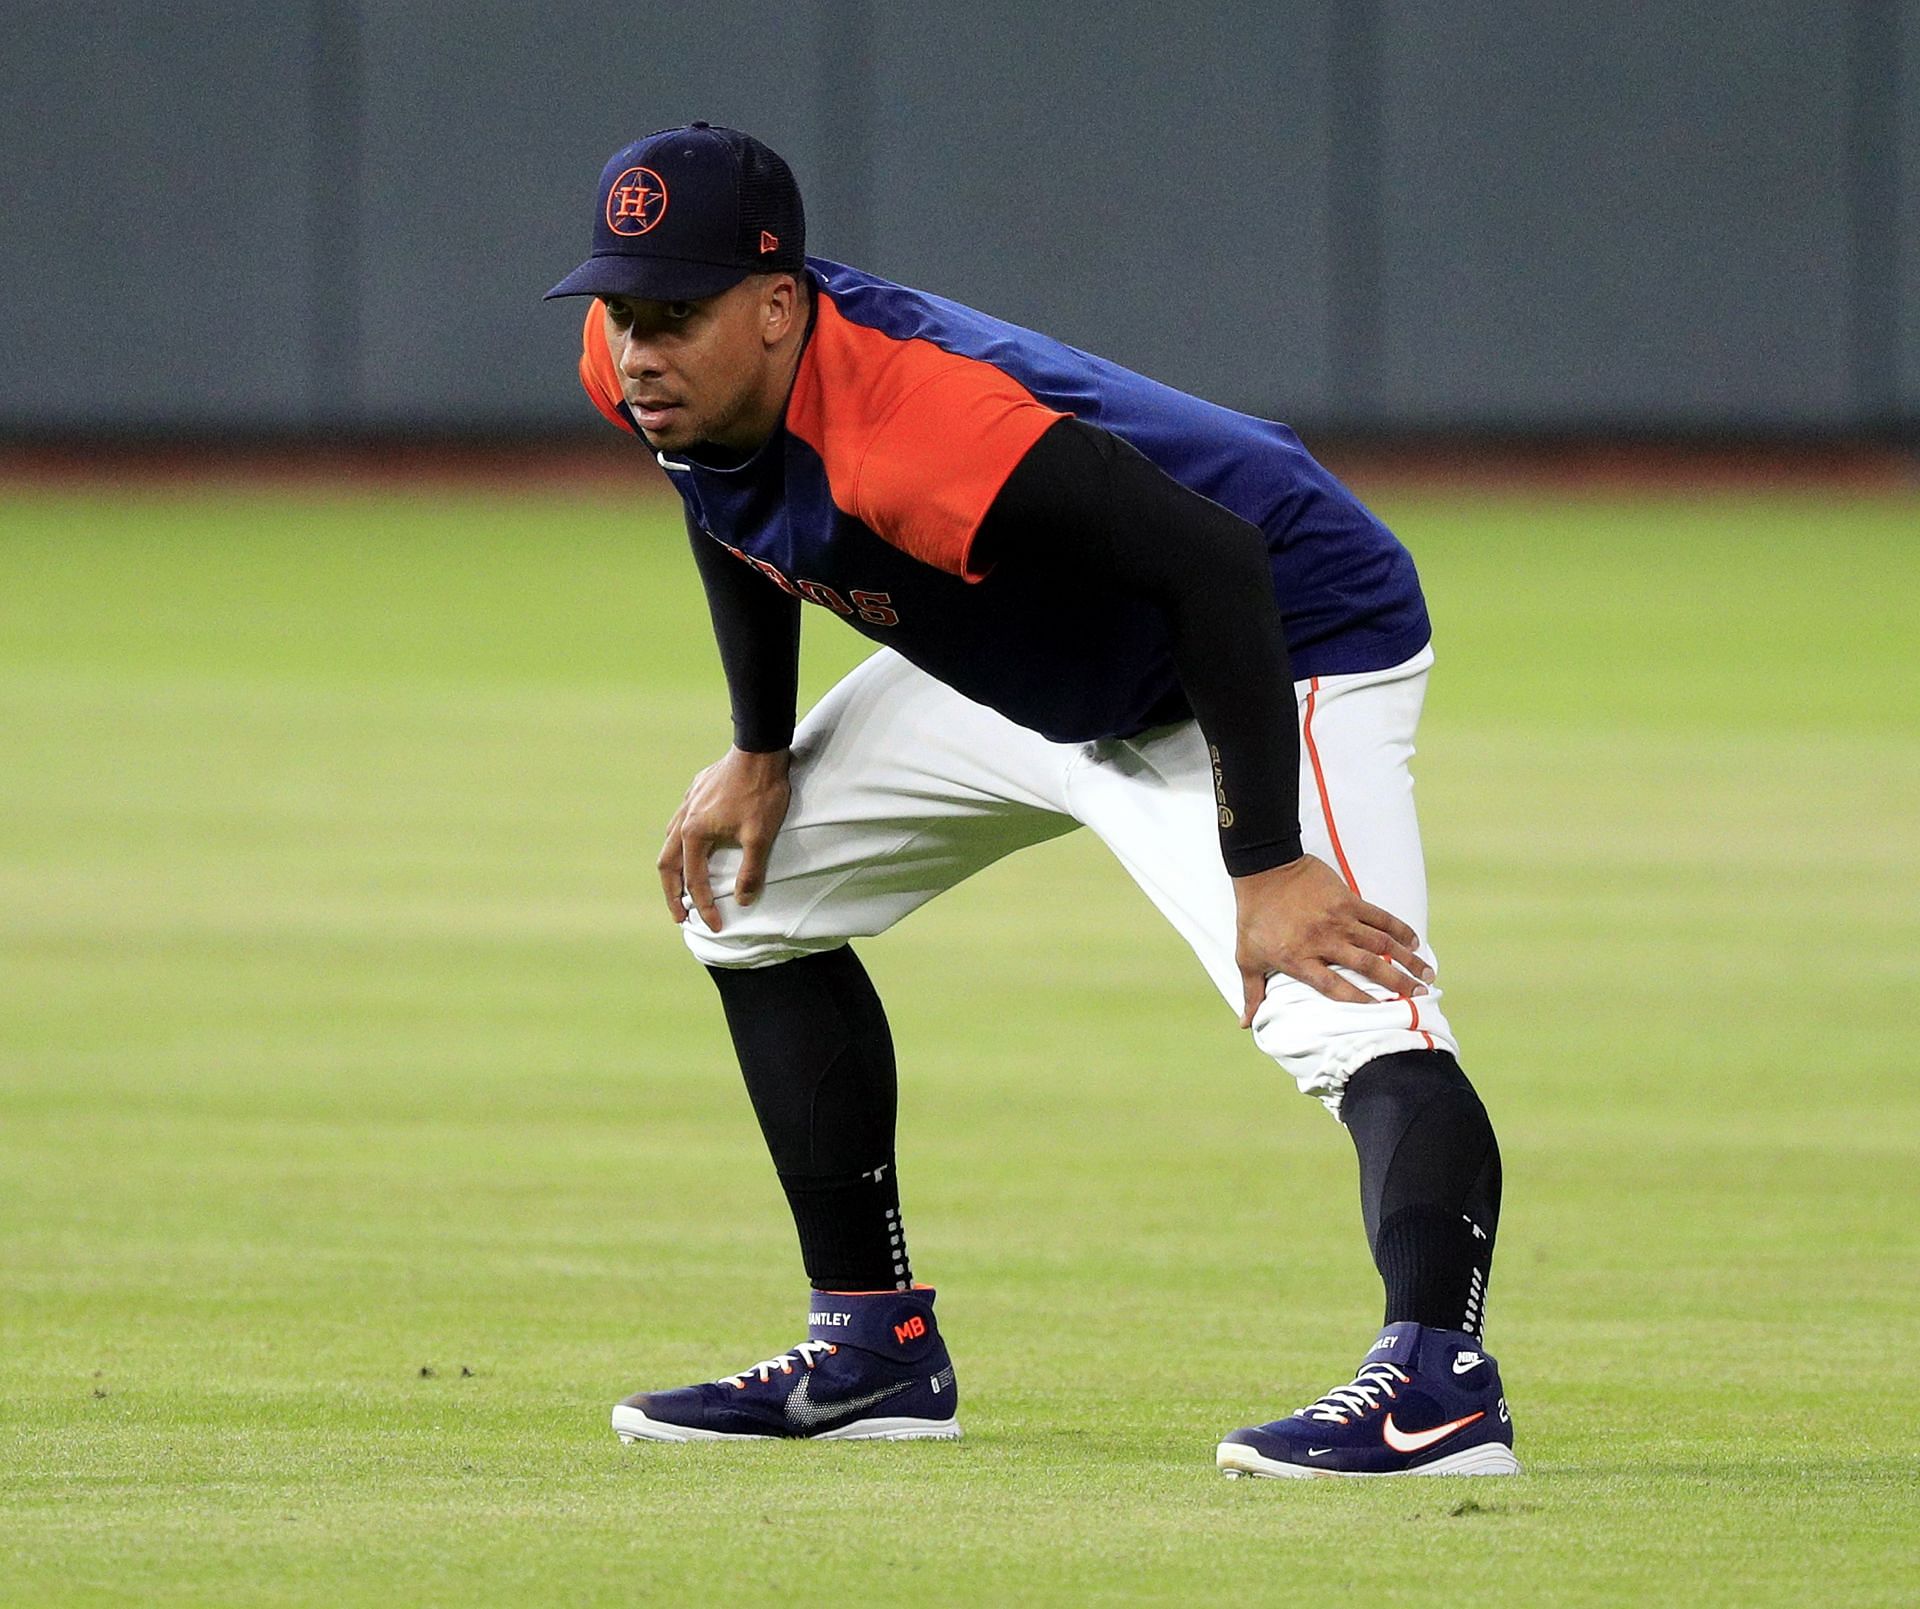 Houston Astros have confirmed that veteran outfielder Michael Brantley will be out of action for the remainder of the season